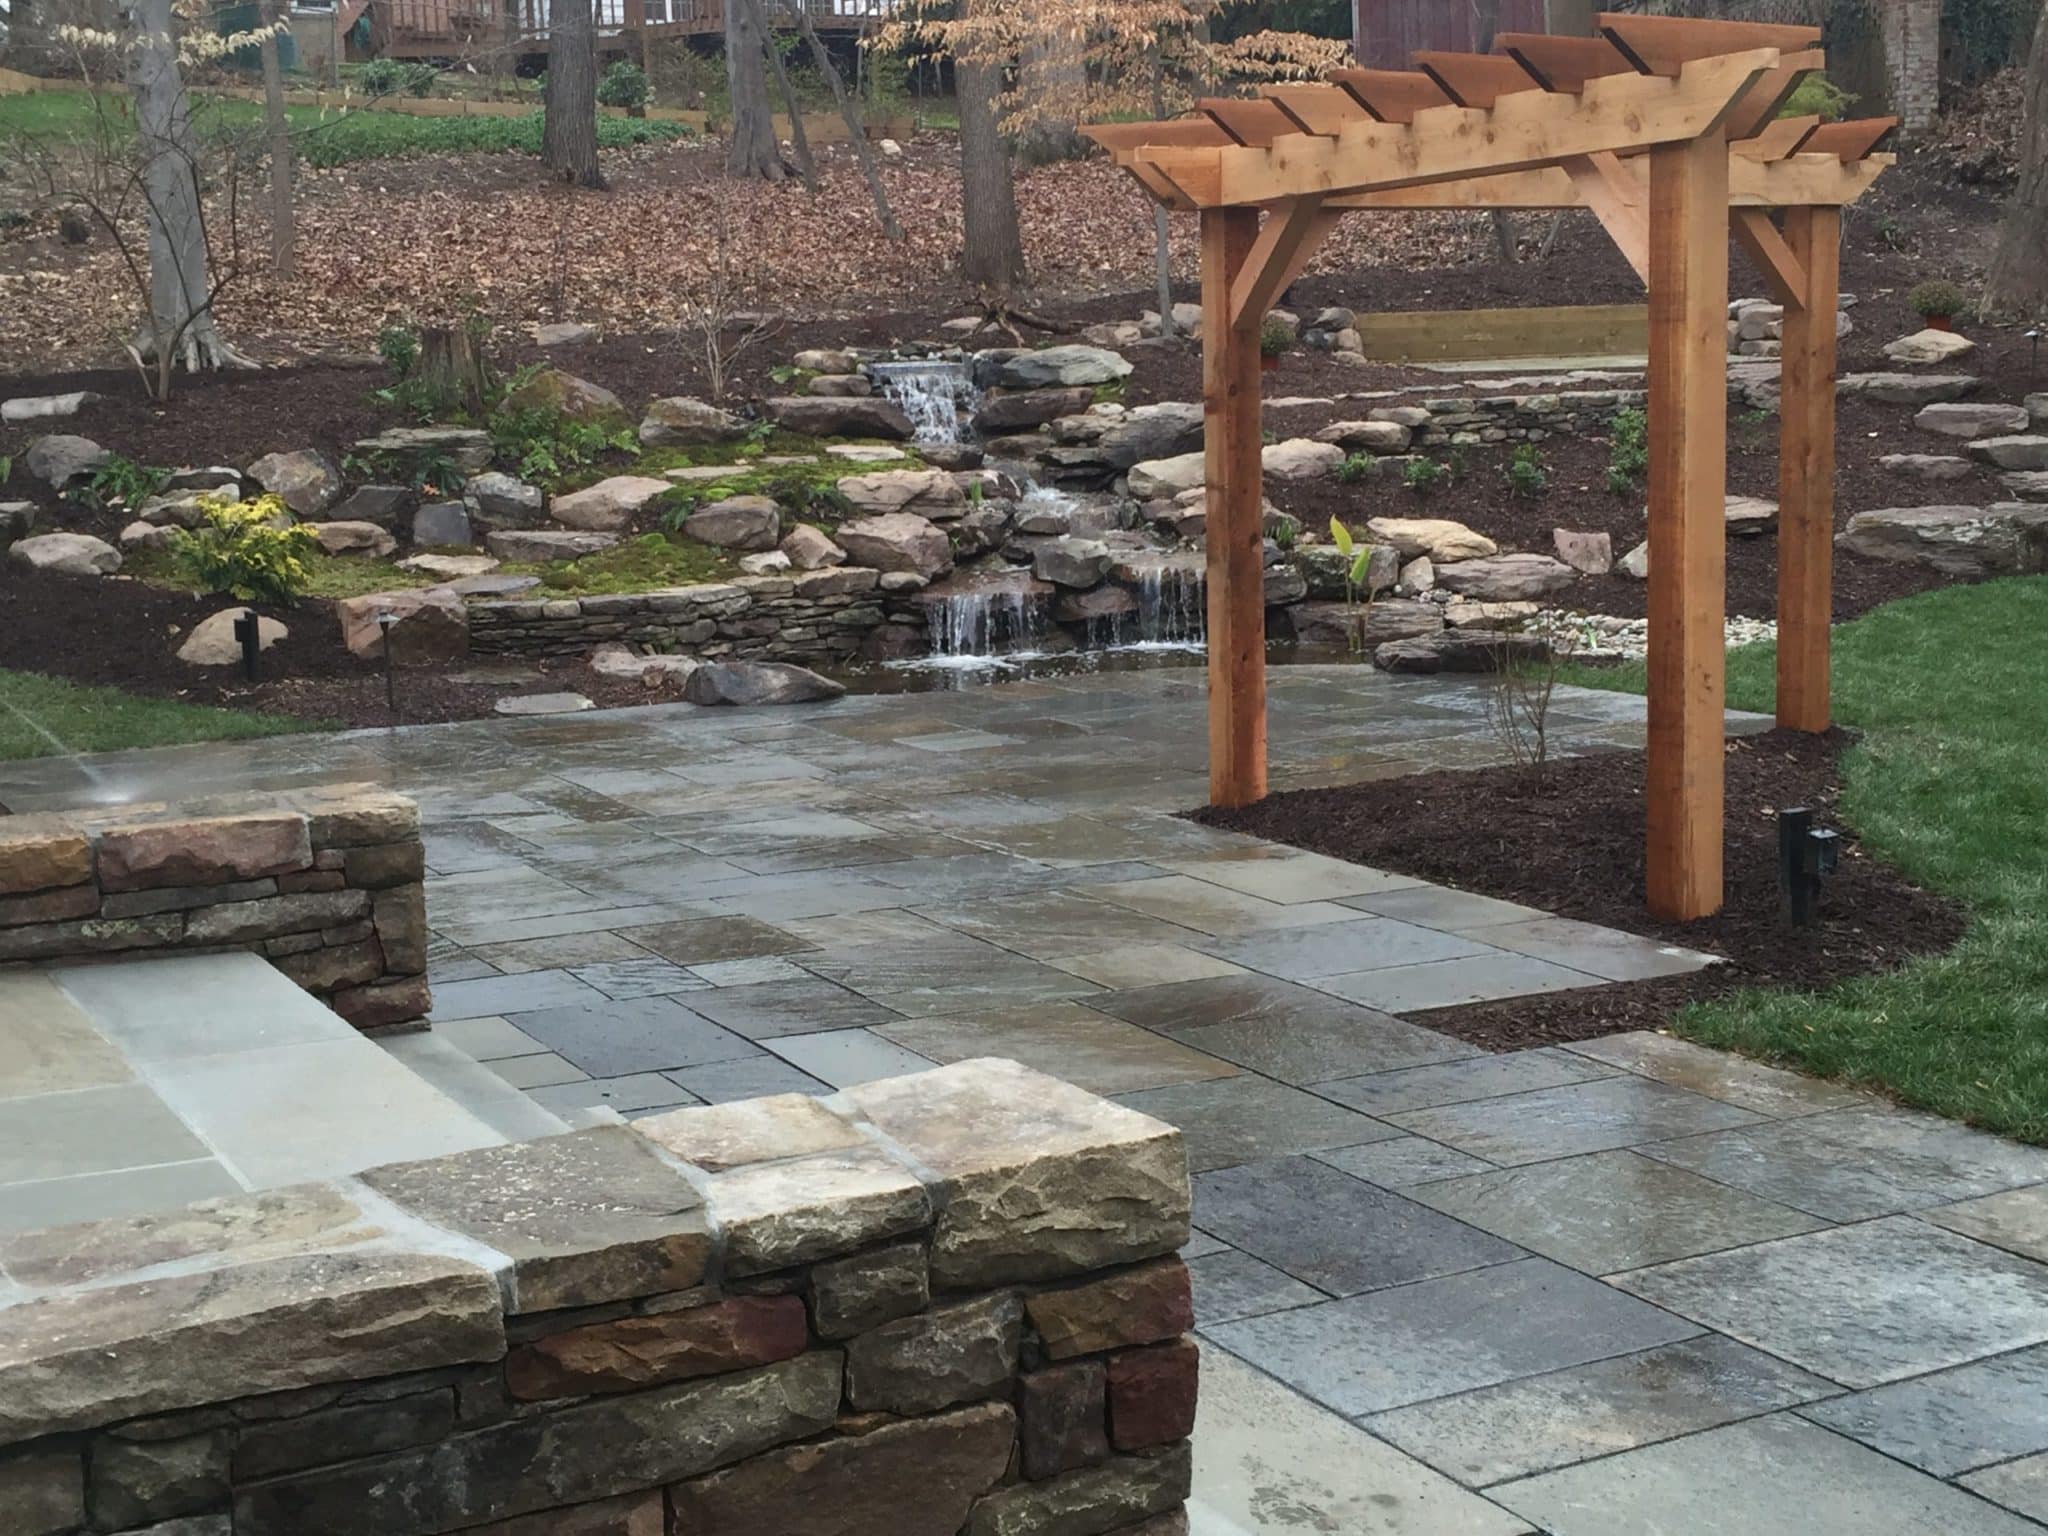 540 Flagstone Patio with Cedar Arbor and Waterfalls Built Into the Hillside